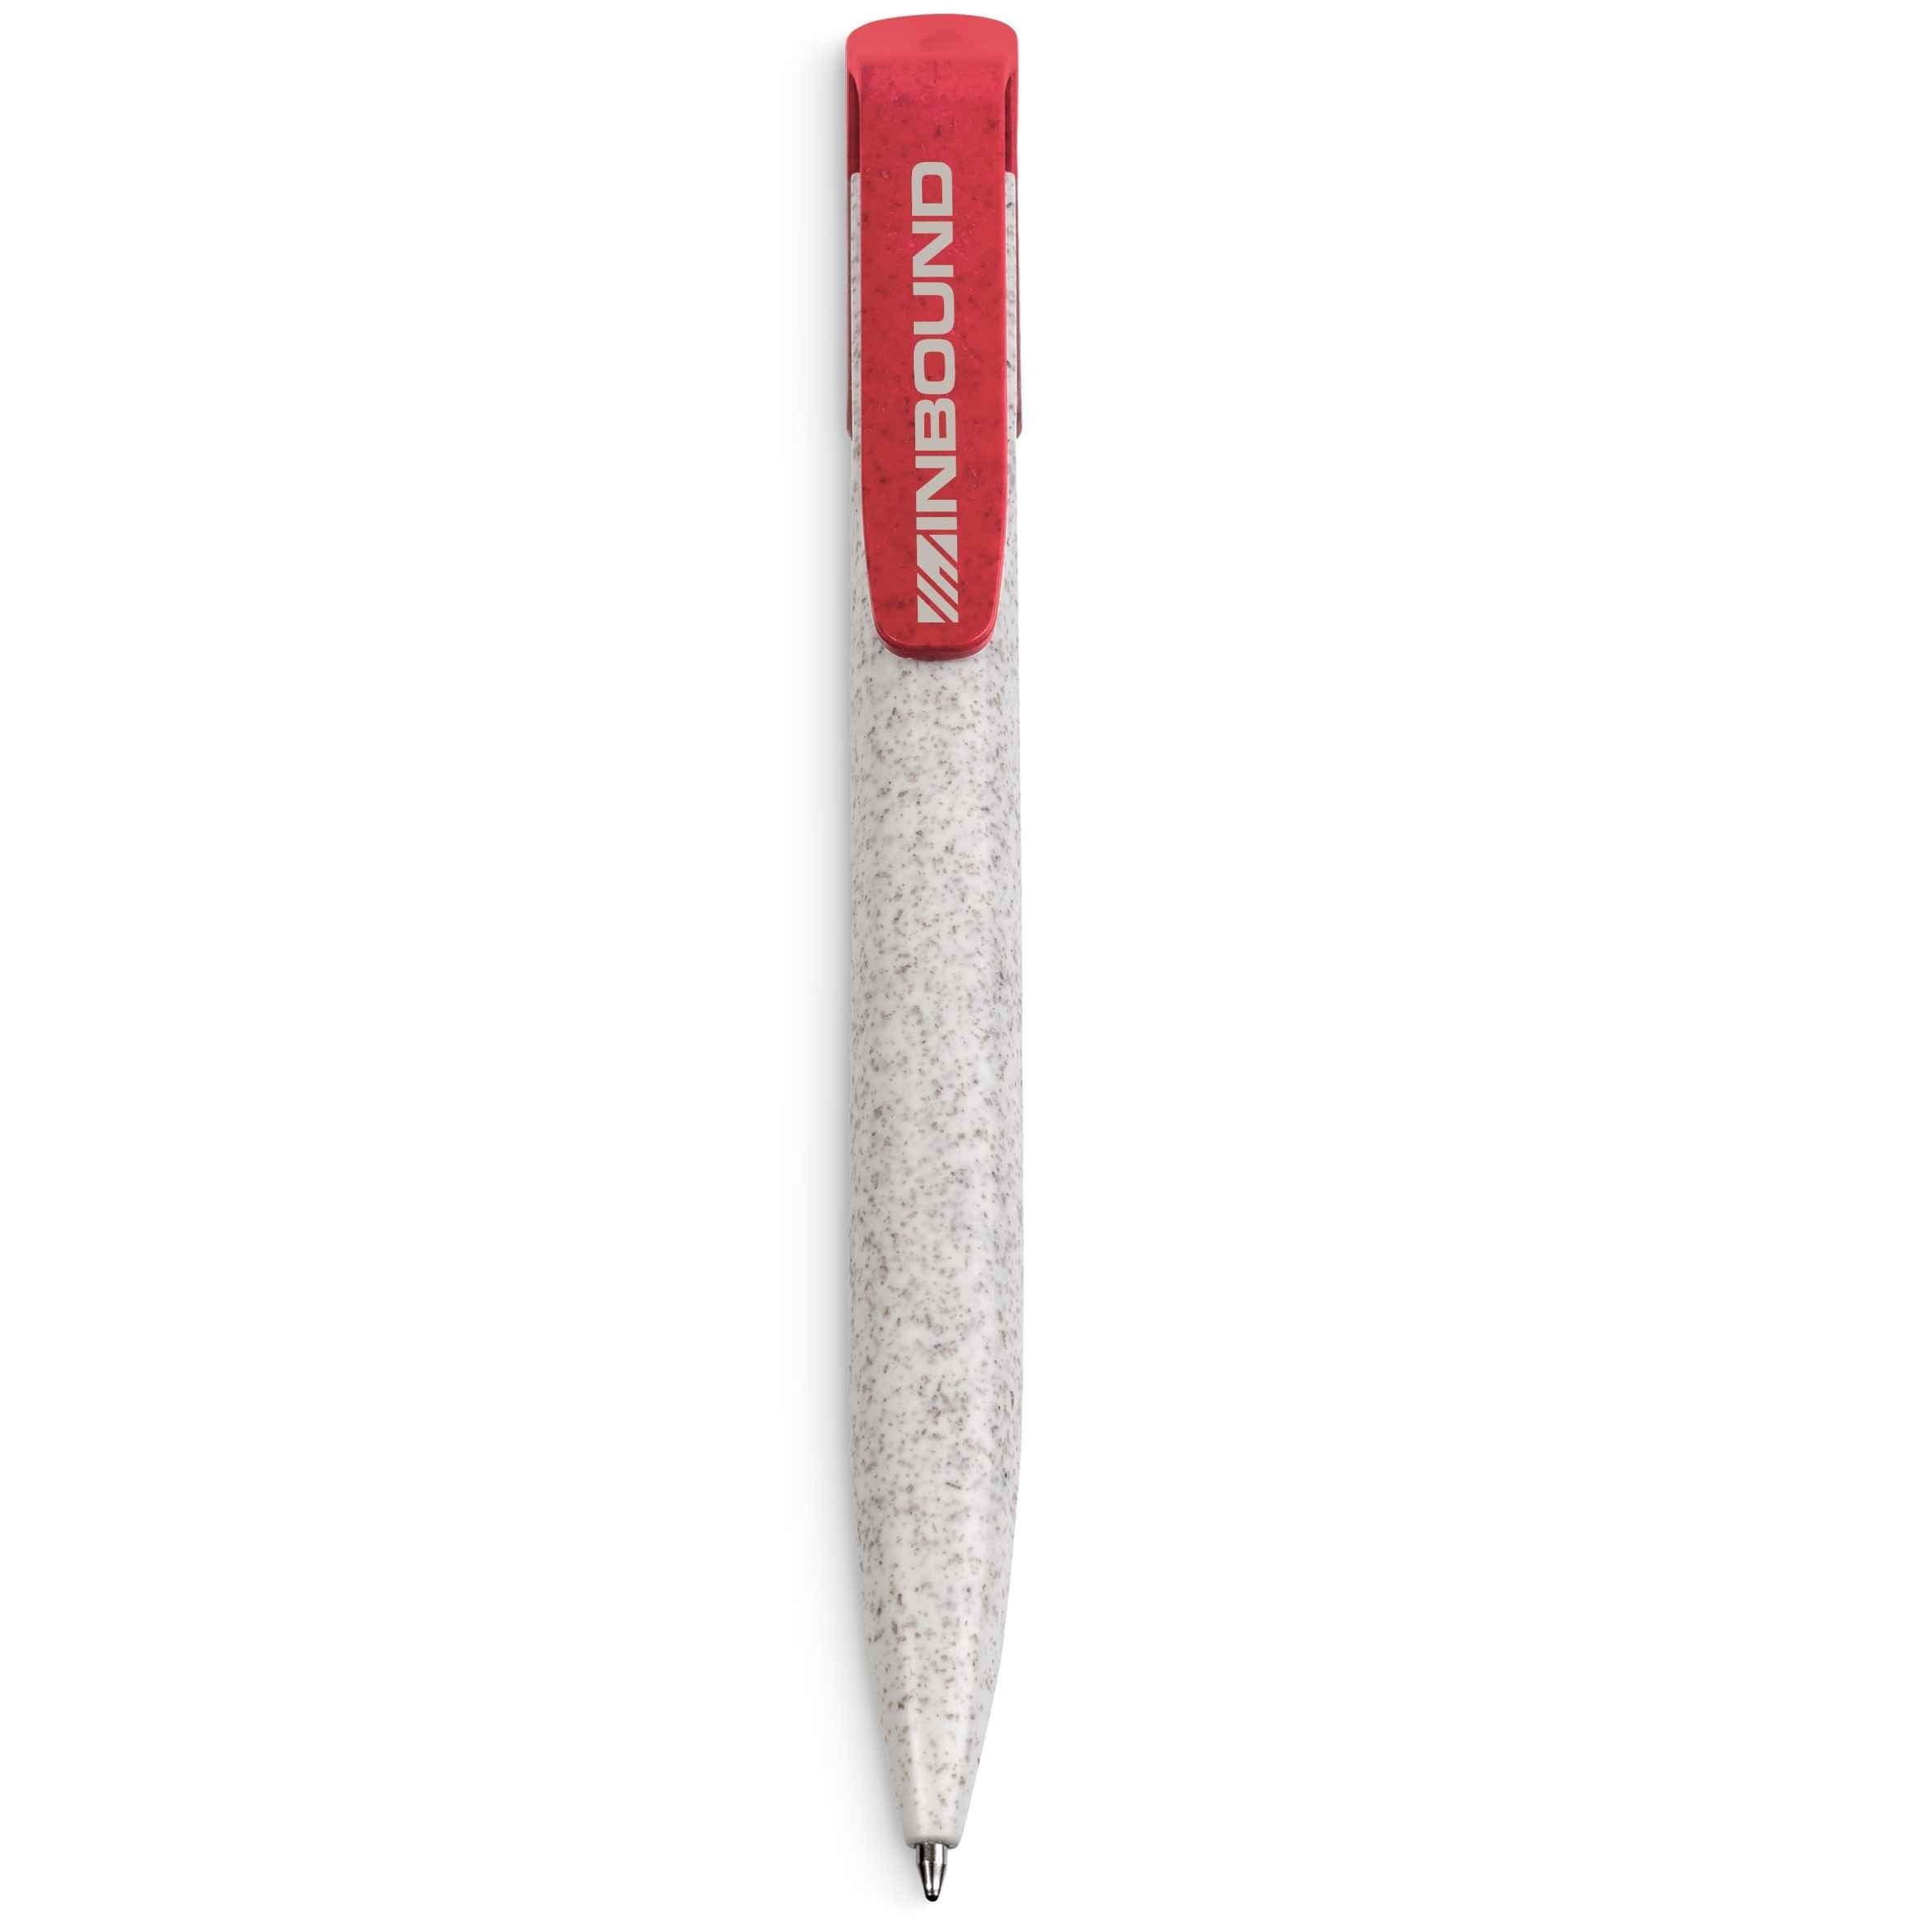 A wheat straw environmentally friendly pen shown in red